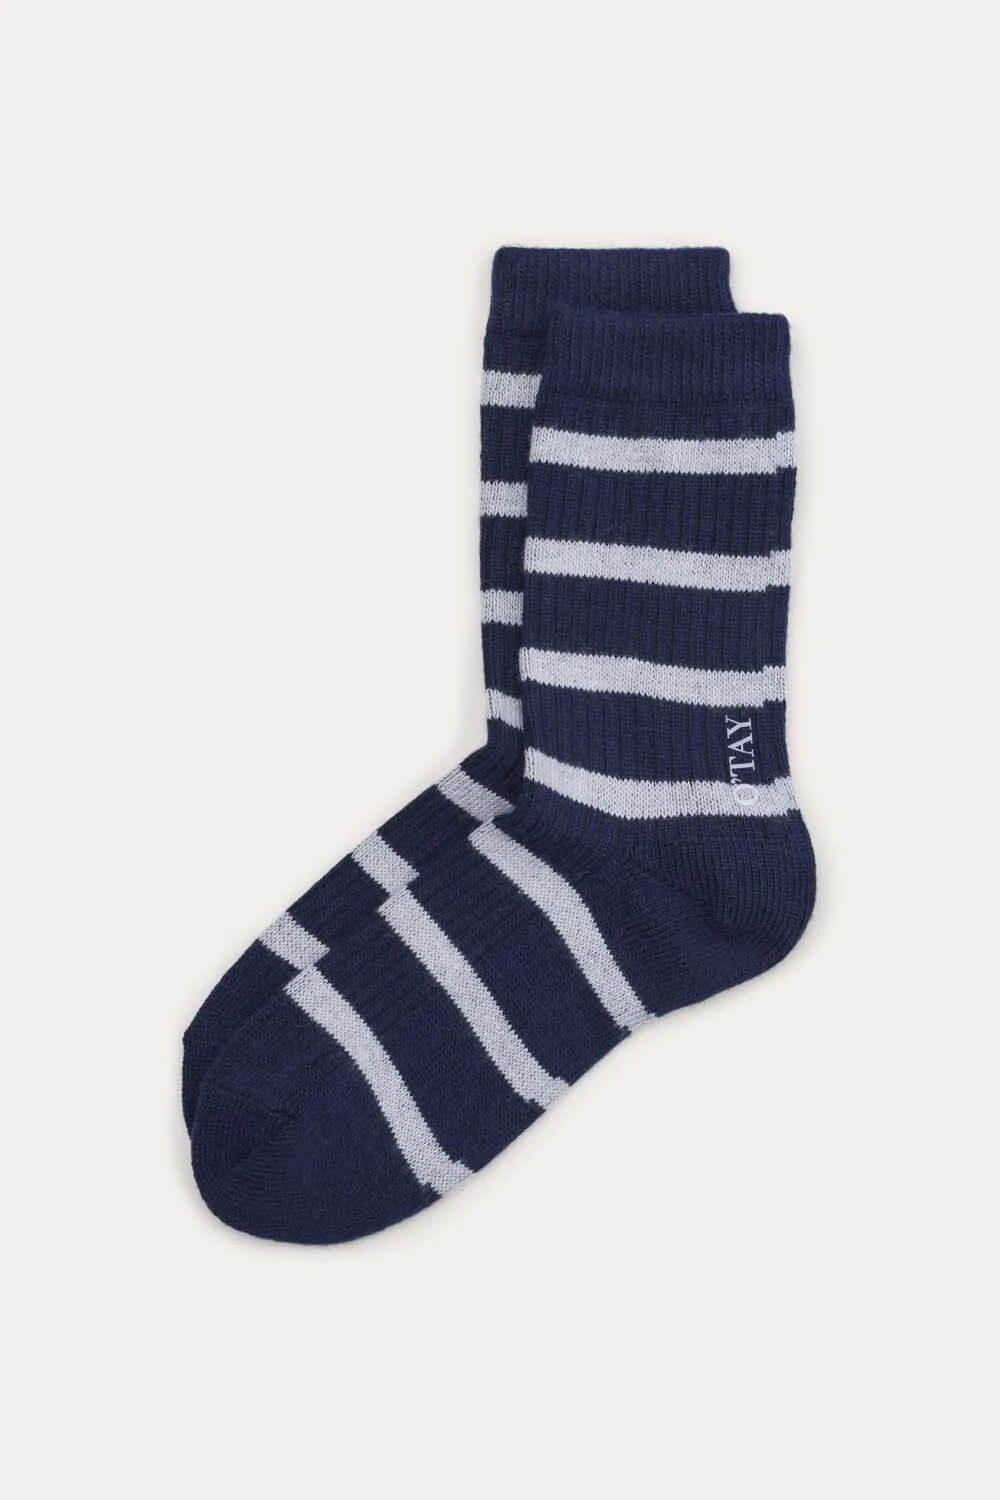 O'TAY Striped Socks Blend Accessories Navy/Off White